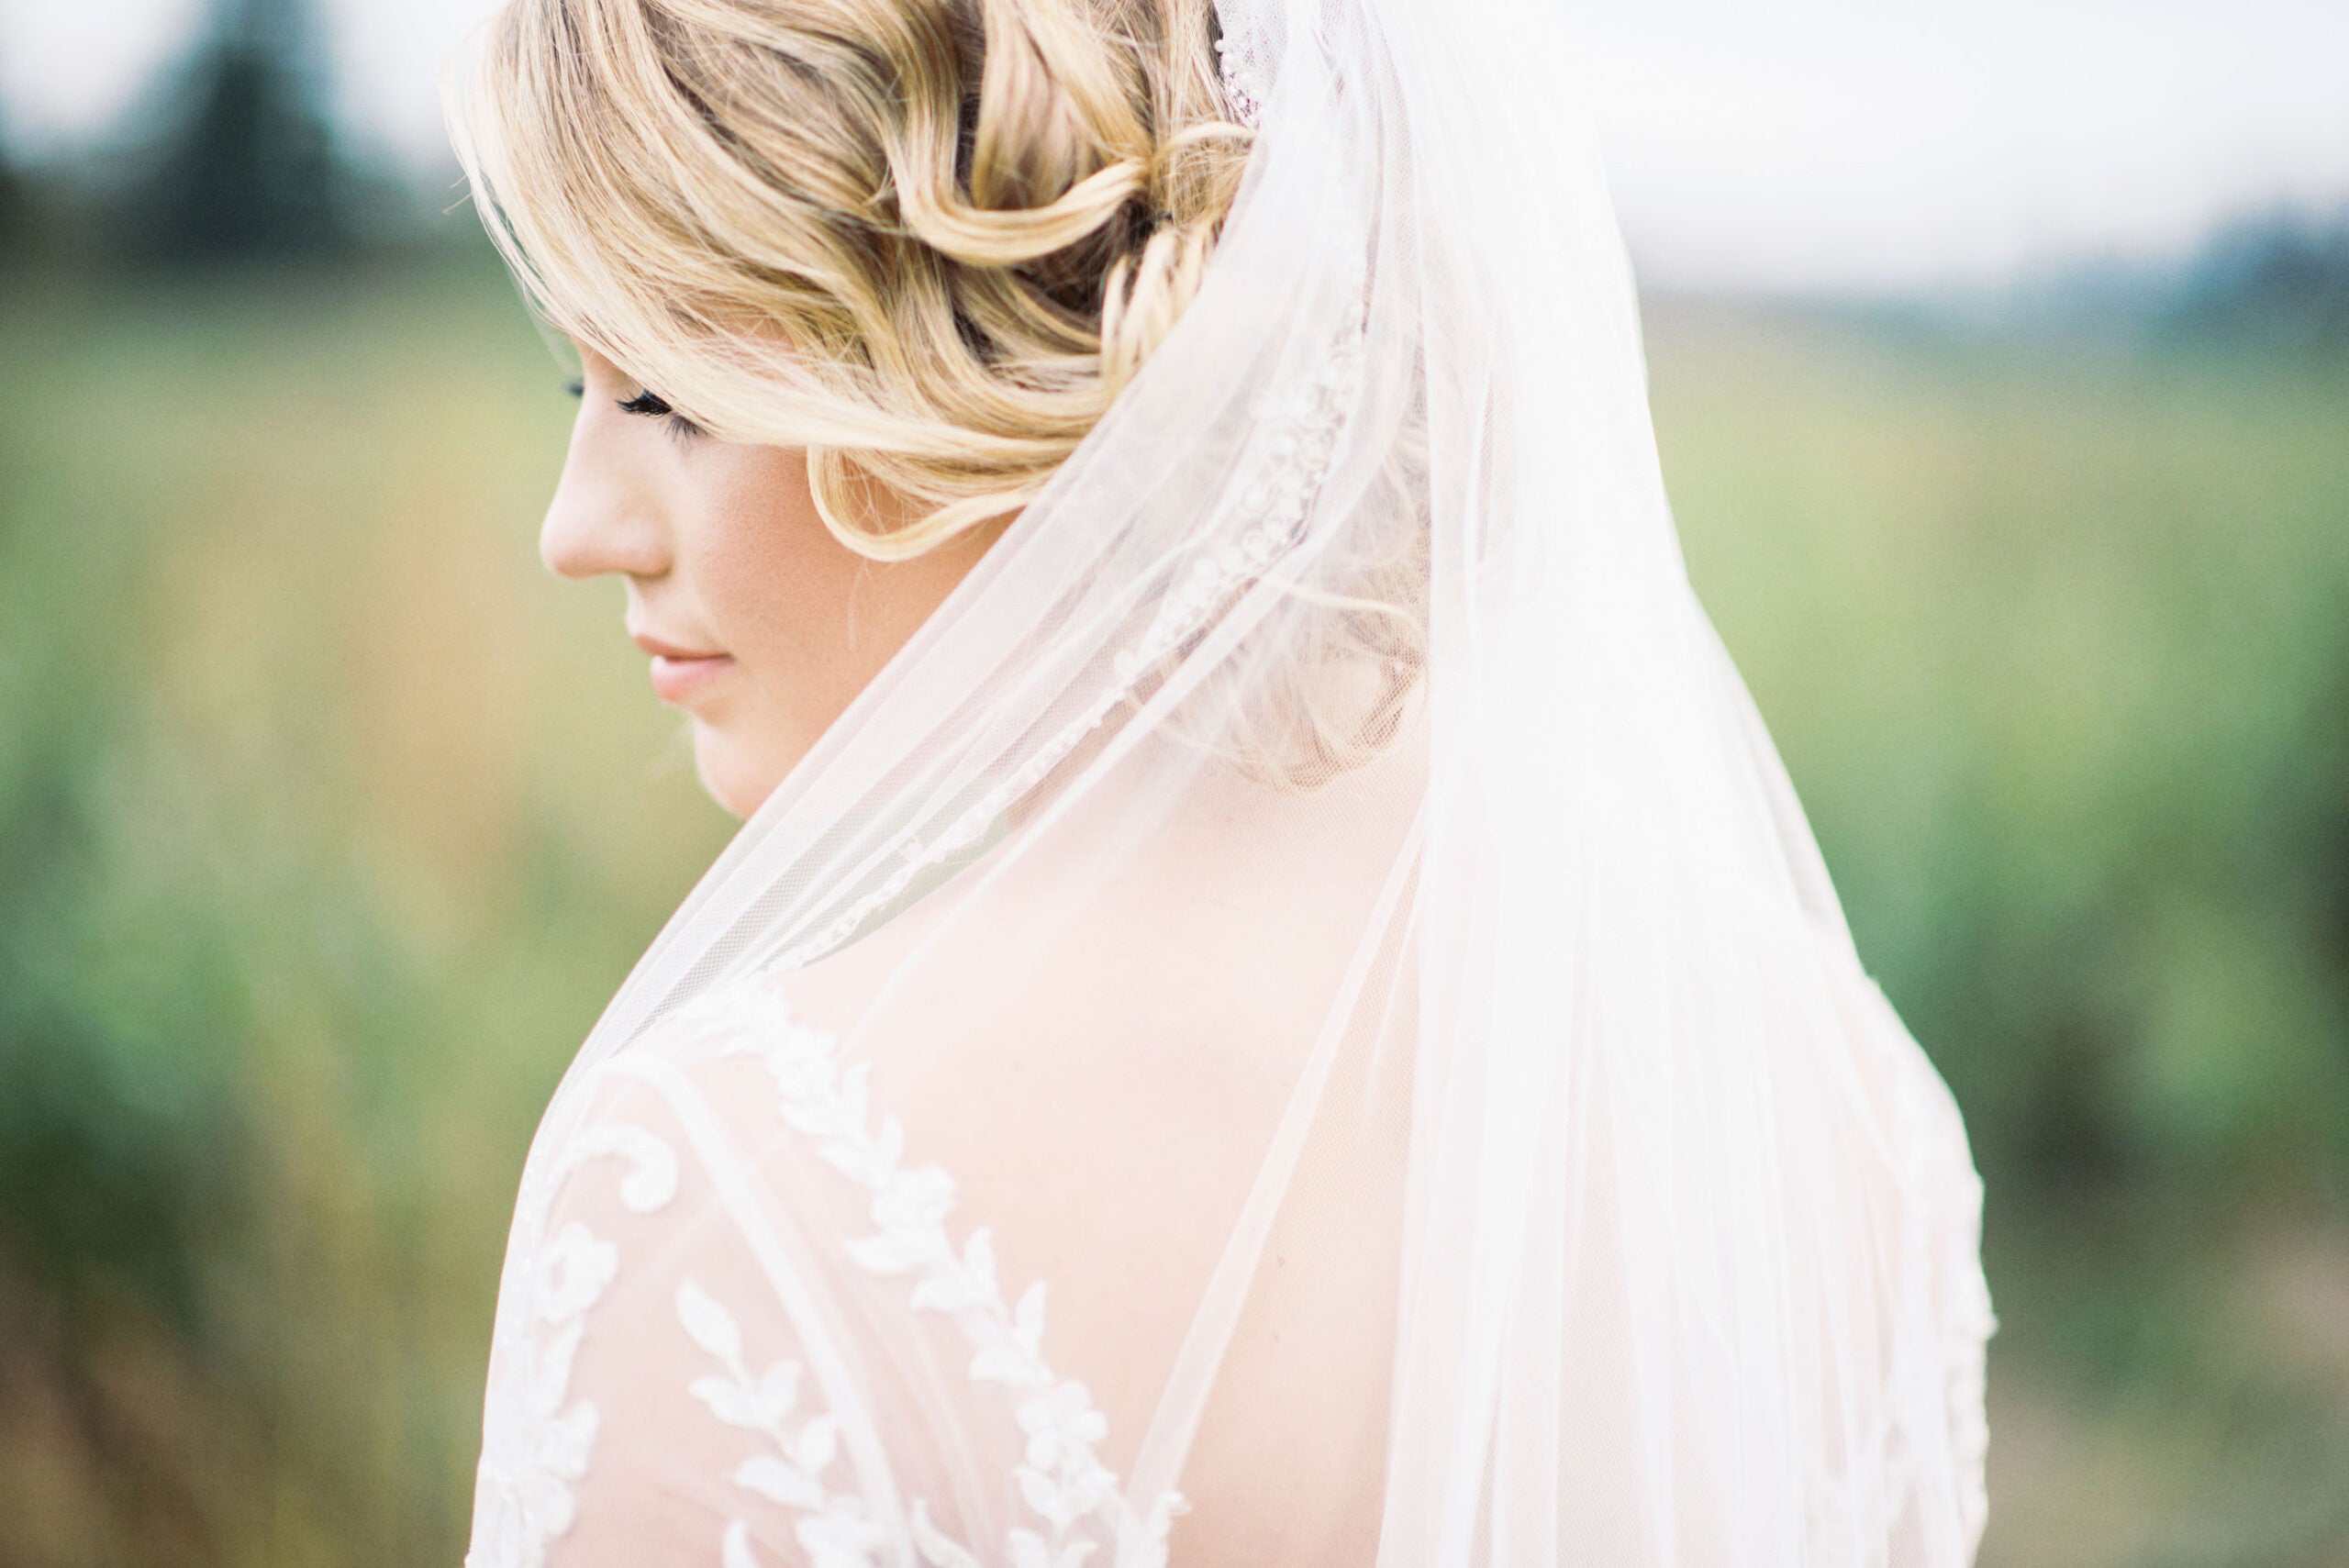 the archetype process film presets wedding photography